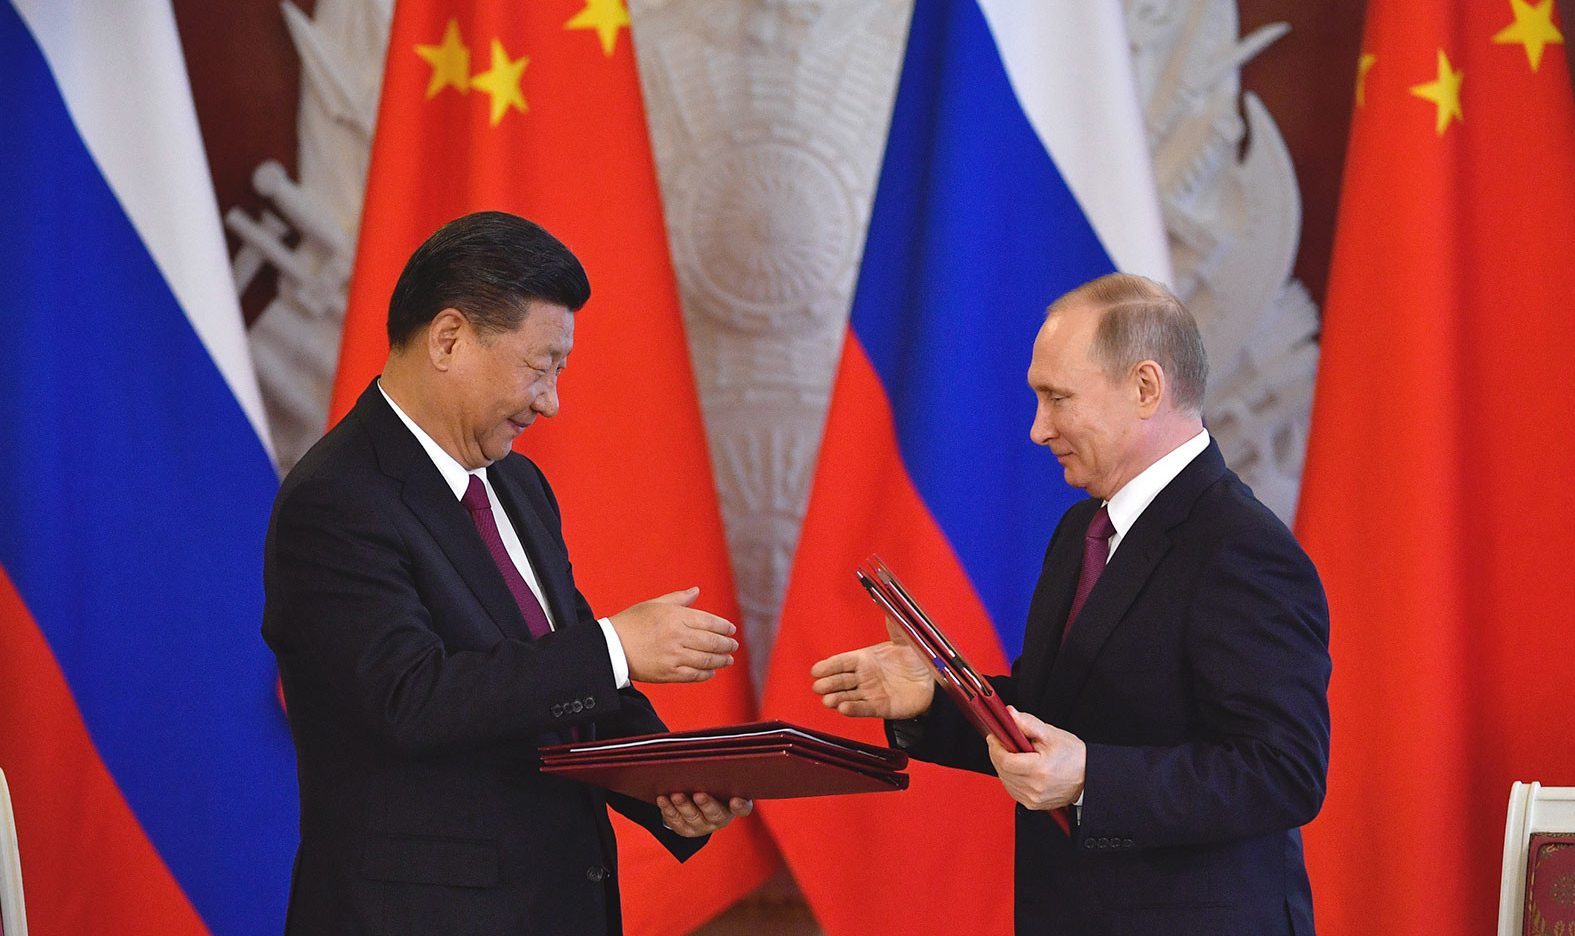 Russia predicted an increase in the number of Chinese goods to replace Western ones